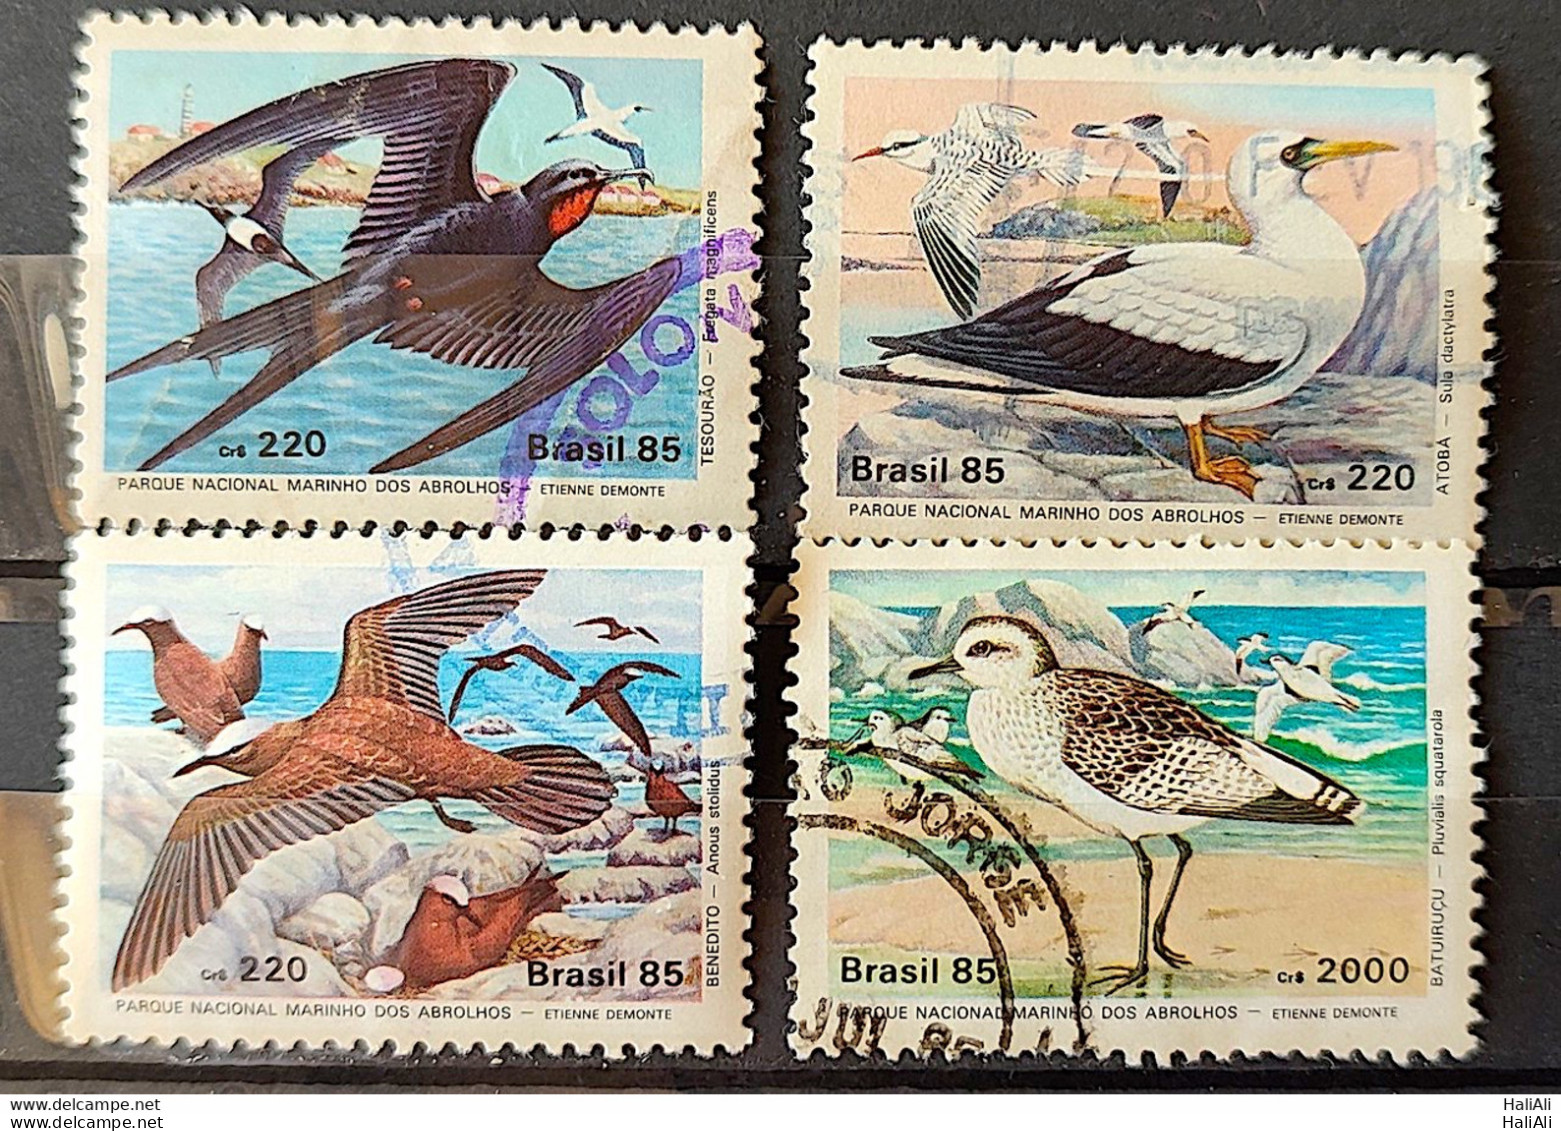 C 1461 Brazil Stamp Fauna Abrolhos Bird 1985 Complete Series Circulated 1 - Used Stamps